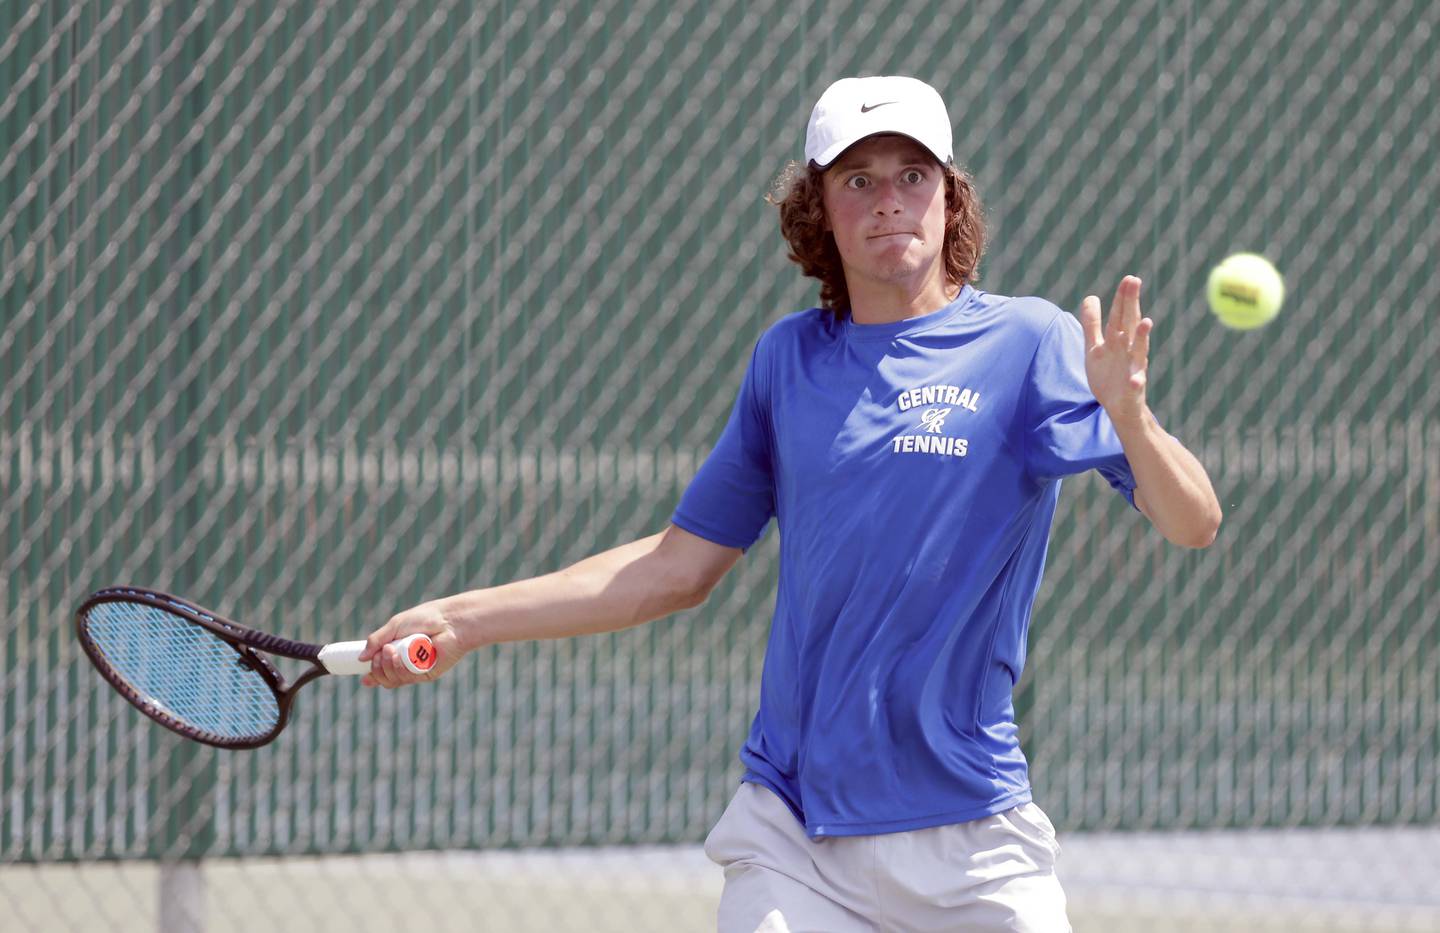 Burlington Central's Luke Welker during the state boys tennis finals at Hersey High School Saturday June 12, 2021 in Arlington Heights.